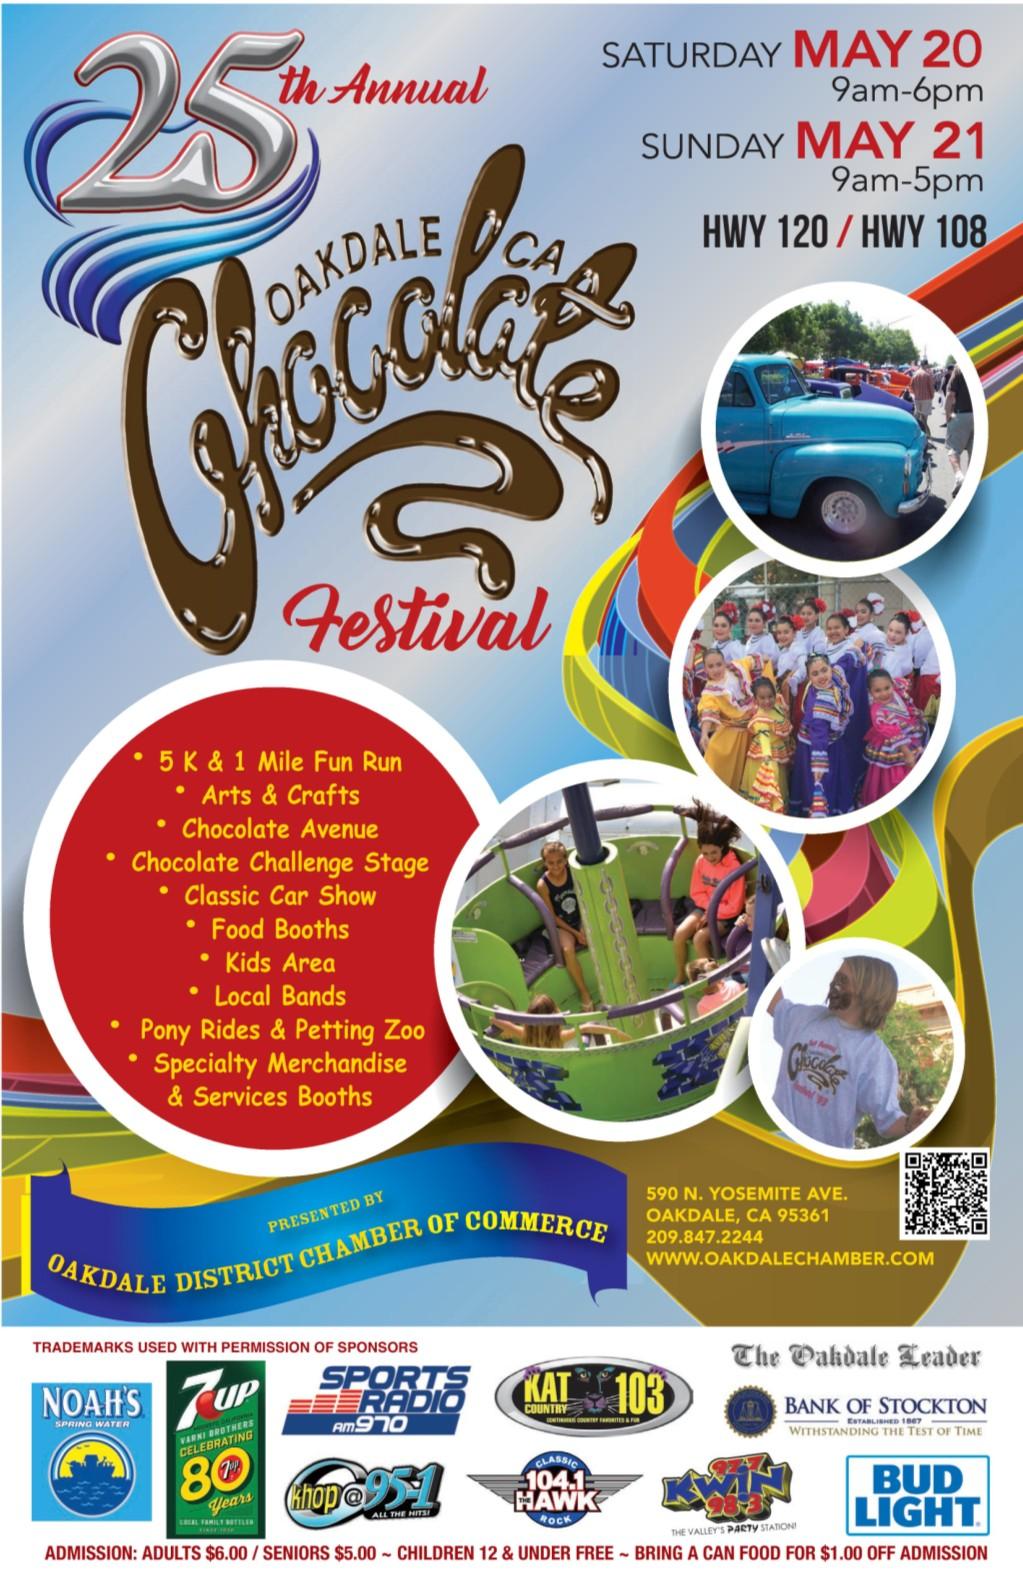 OAKDALE CHOCOLATE FESTIVAL SPONSORSHIP PACKAGE MAY 19 th & 20 th, 2018 The Oakdale District Chamber of Commerce proudly announces our 26 th Annual Chocolate Festival to be held May 19 & 20, 2018.